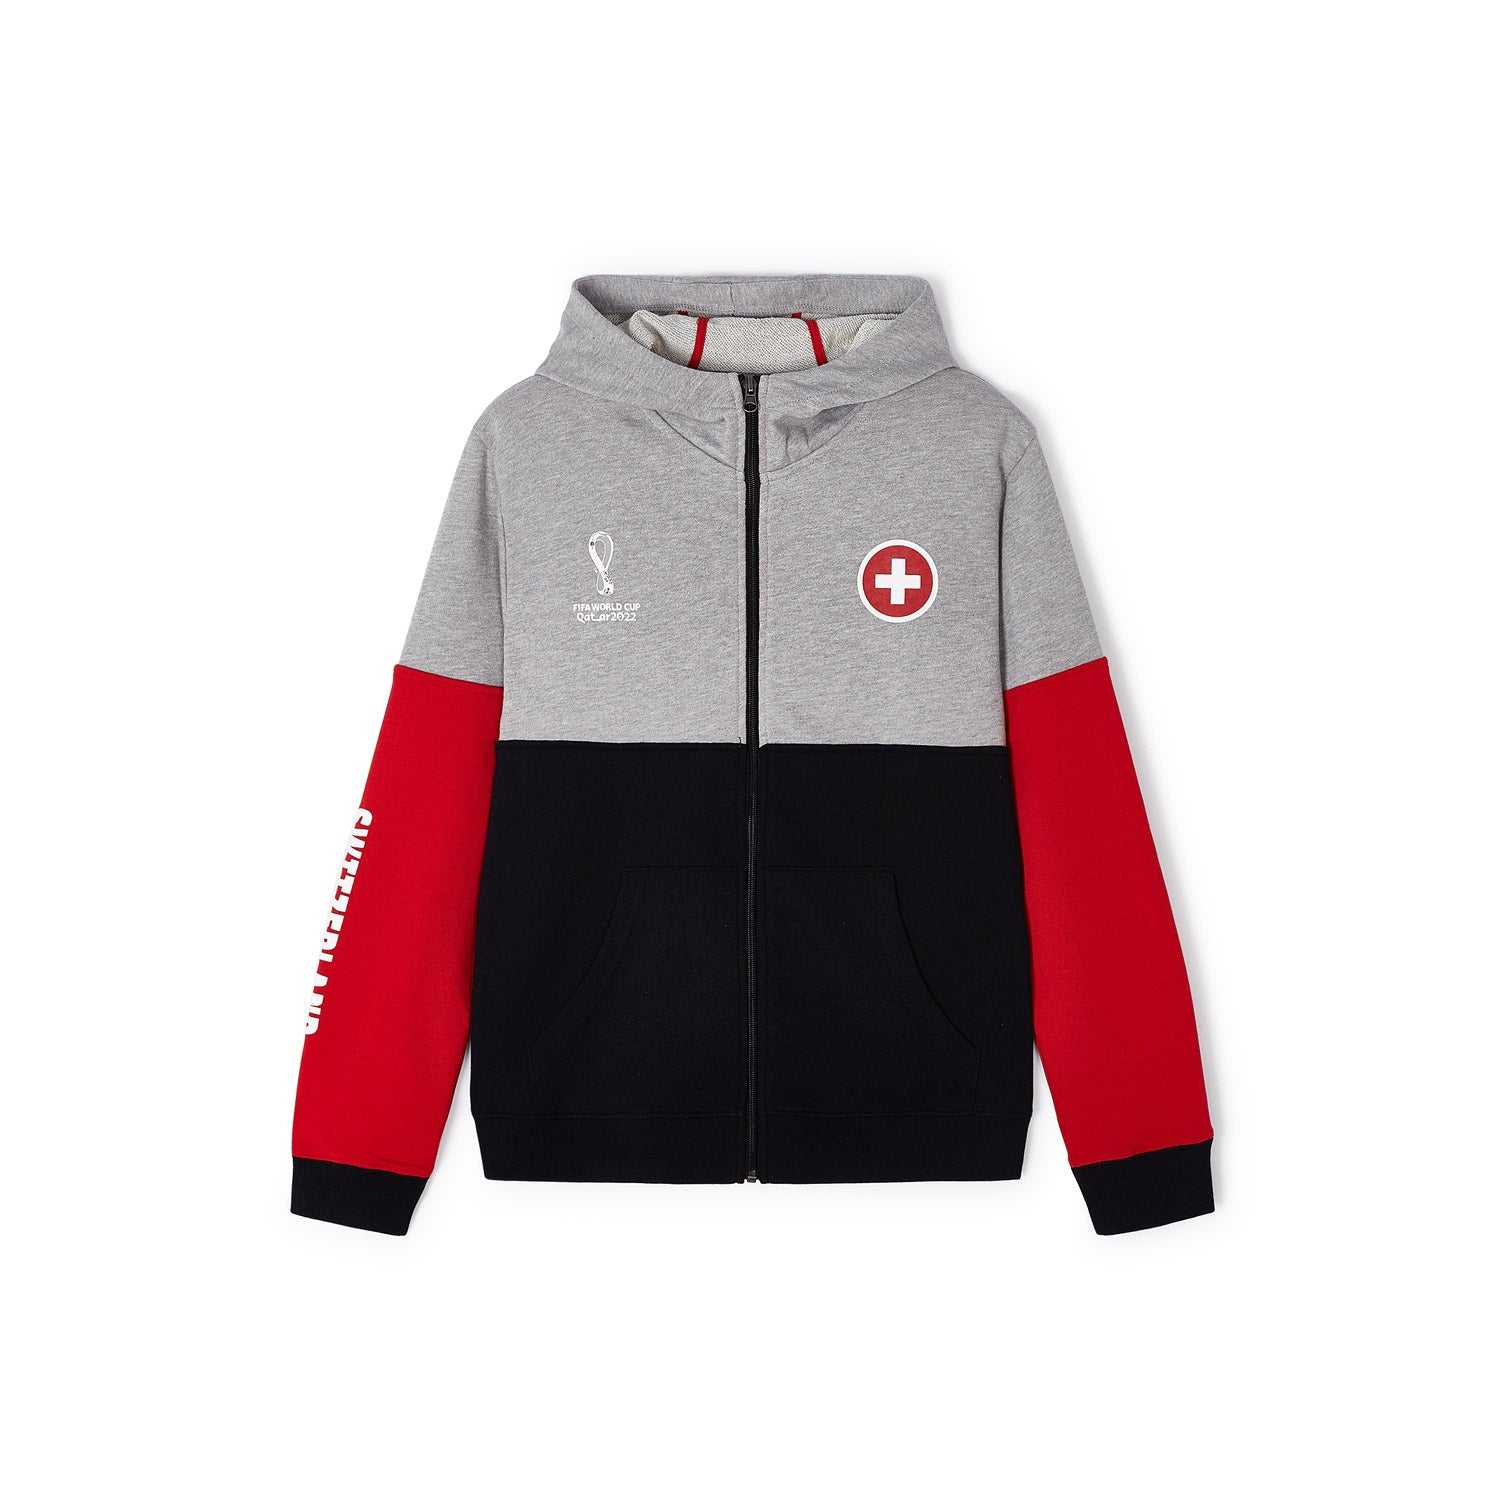 2022 World Cup Switzerland Red Hoodie - Youth